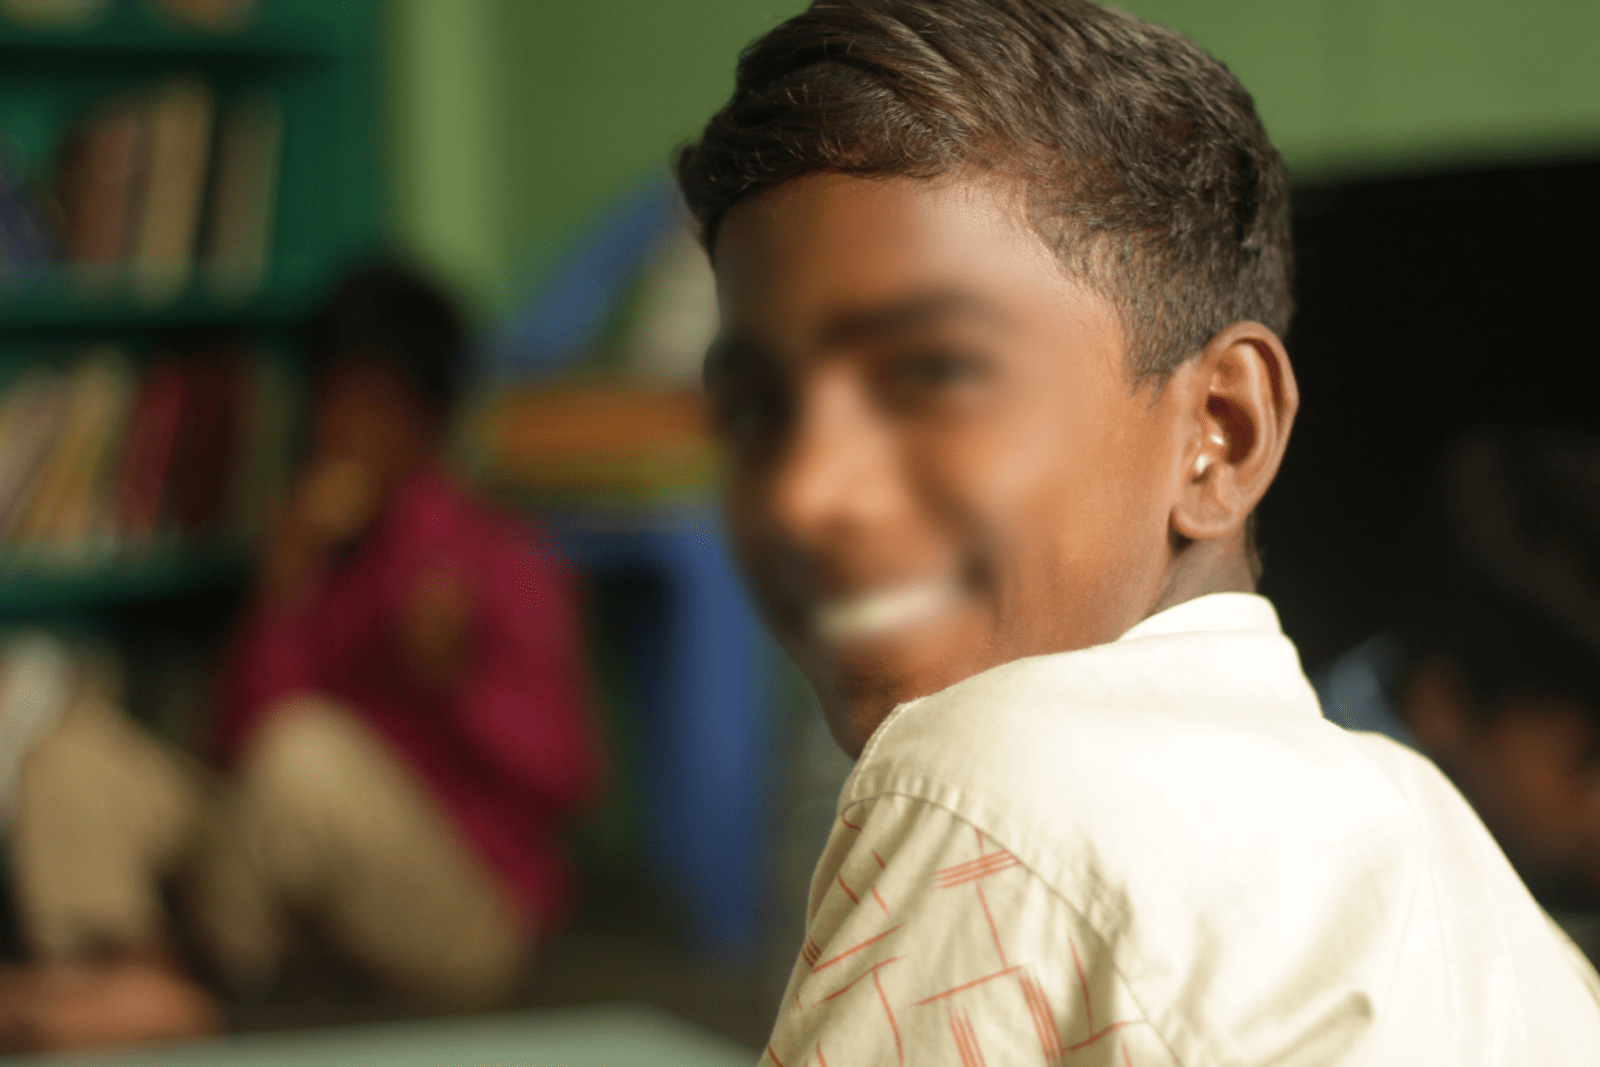 #Communities4Children - How Our Follow Up In Saravanan’s Community Helped Address His Latent Mental Health Condition